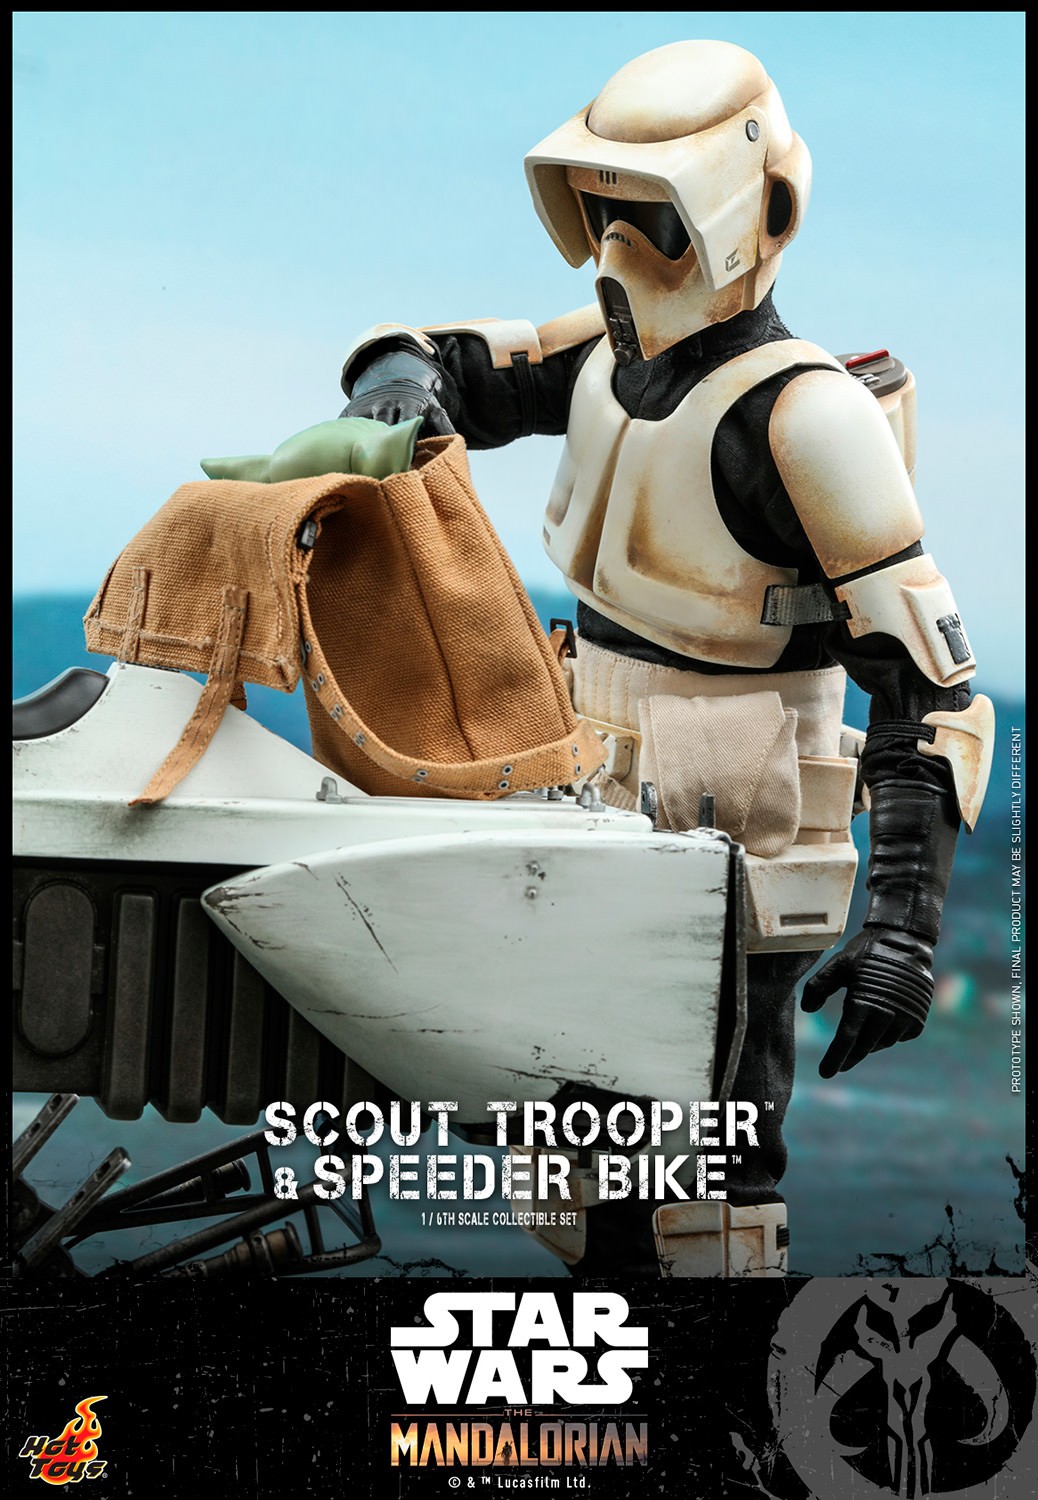 Scout Trooper and Speeder Bike- Prototype Shown